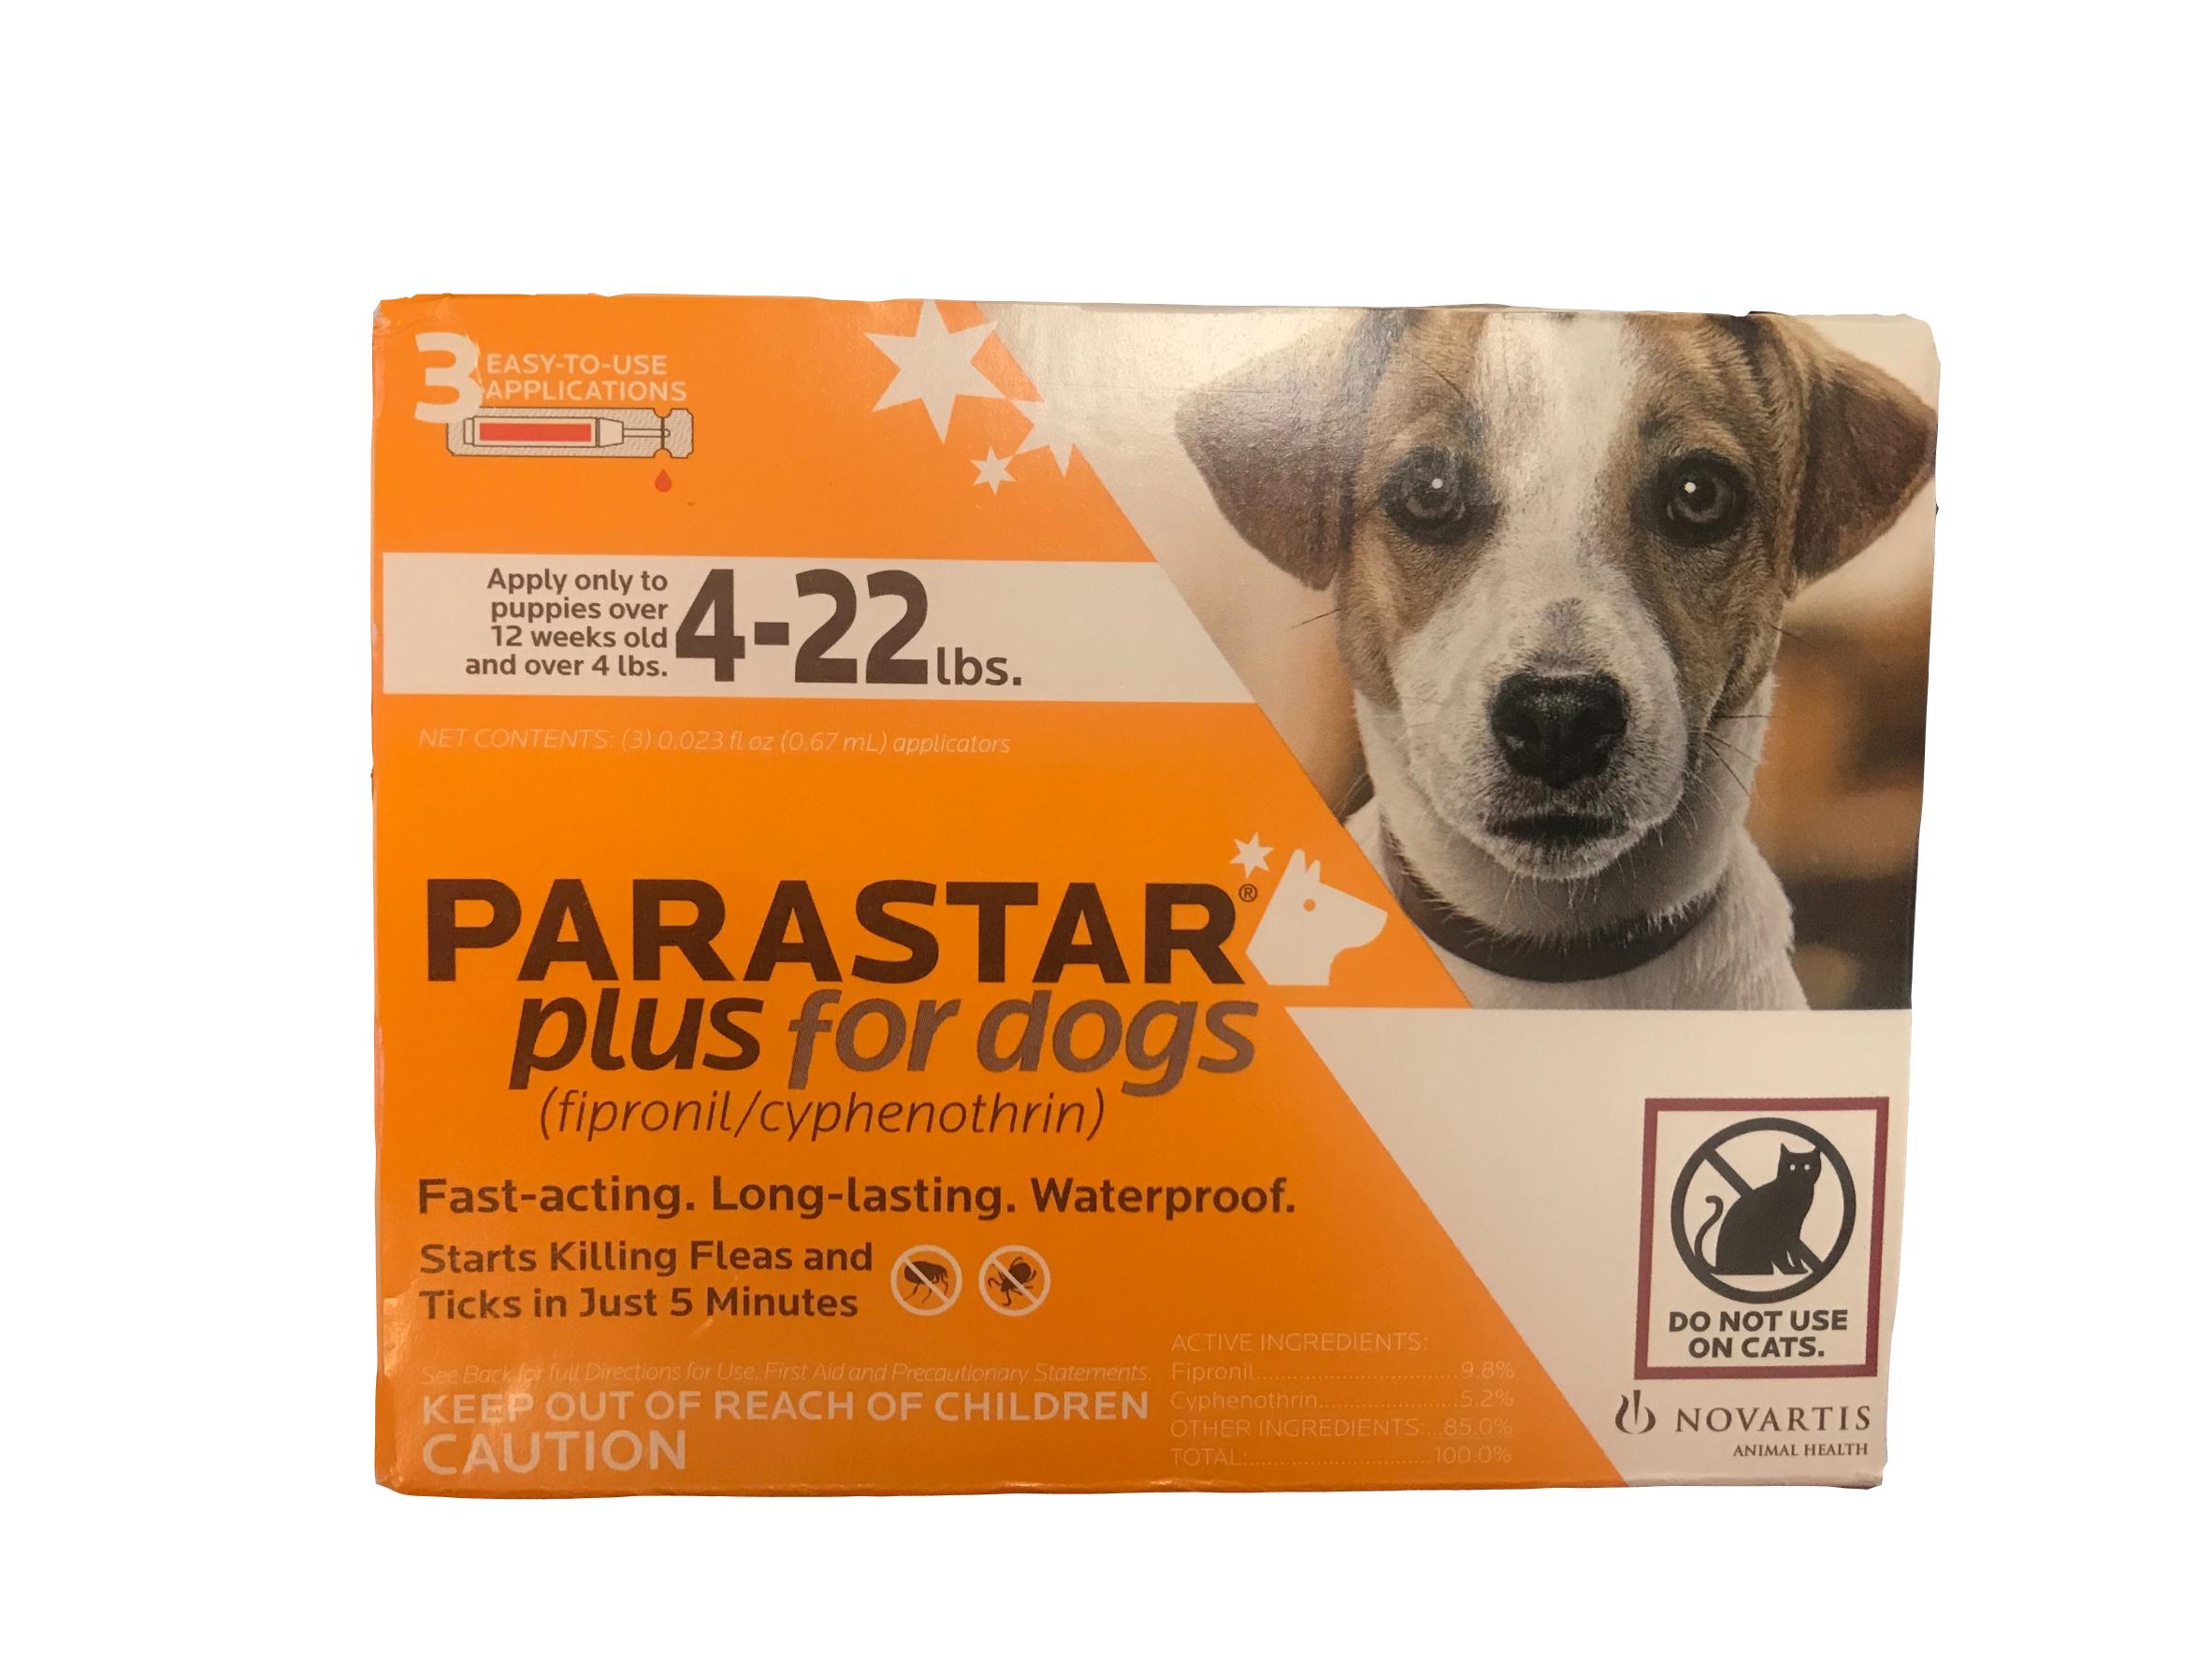 Parastar Plus for Dogs [4-22 lbs] (3 count) 716688090874 | eBay